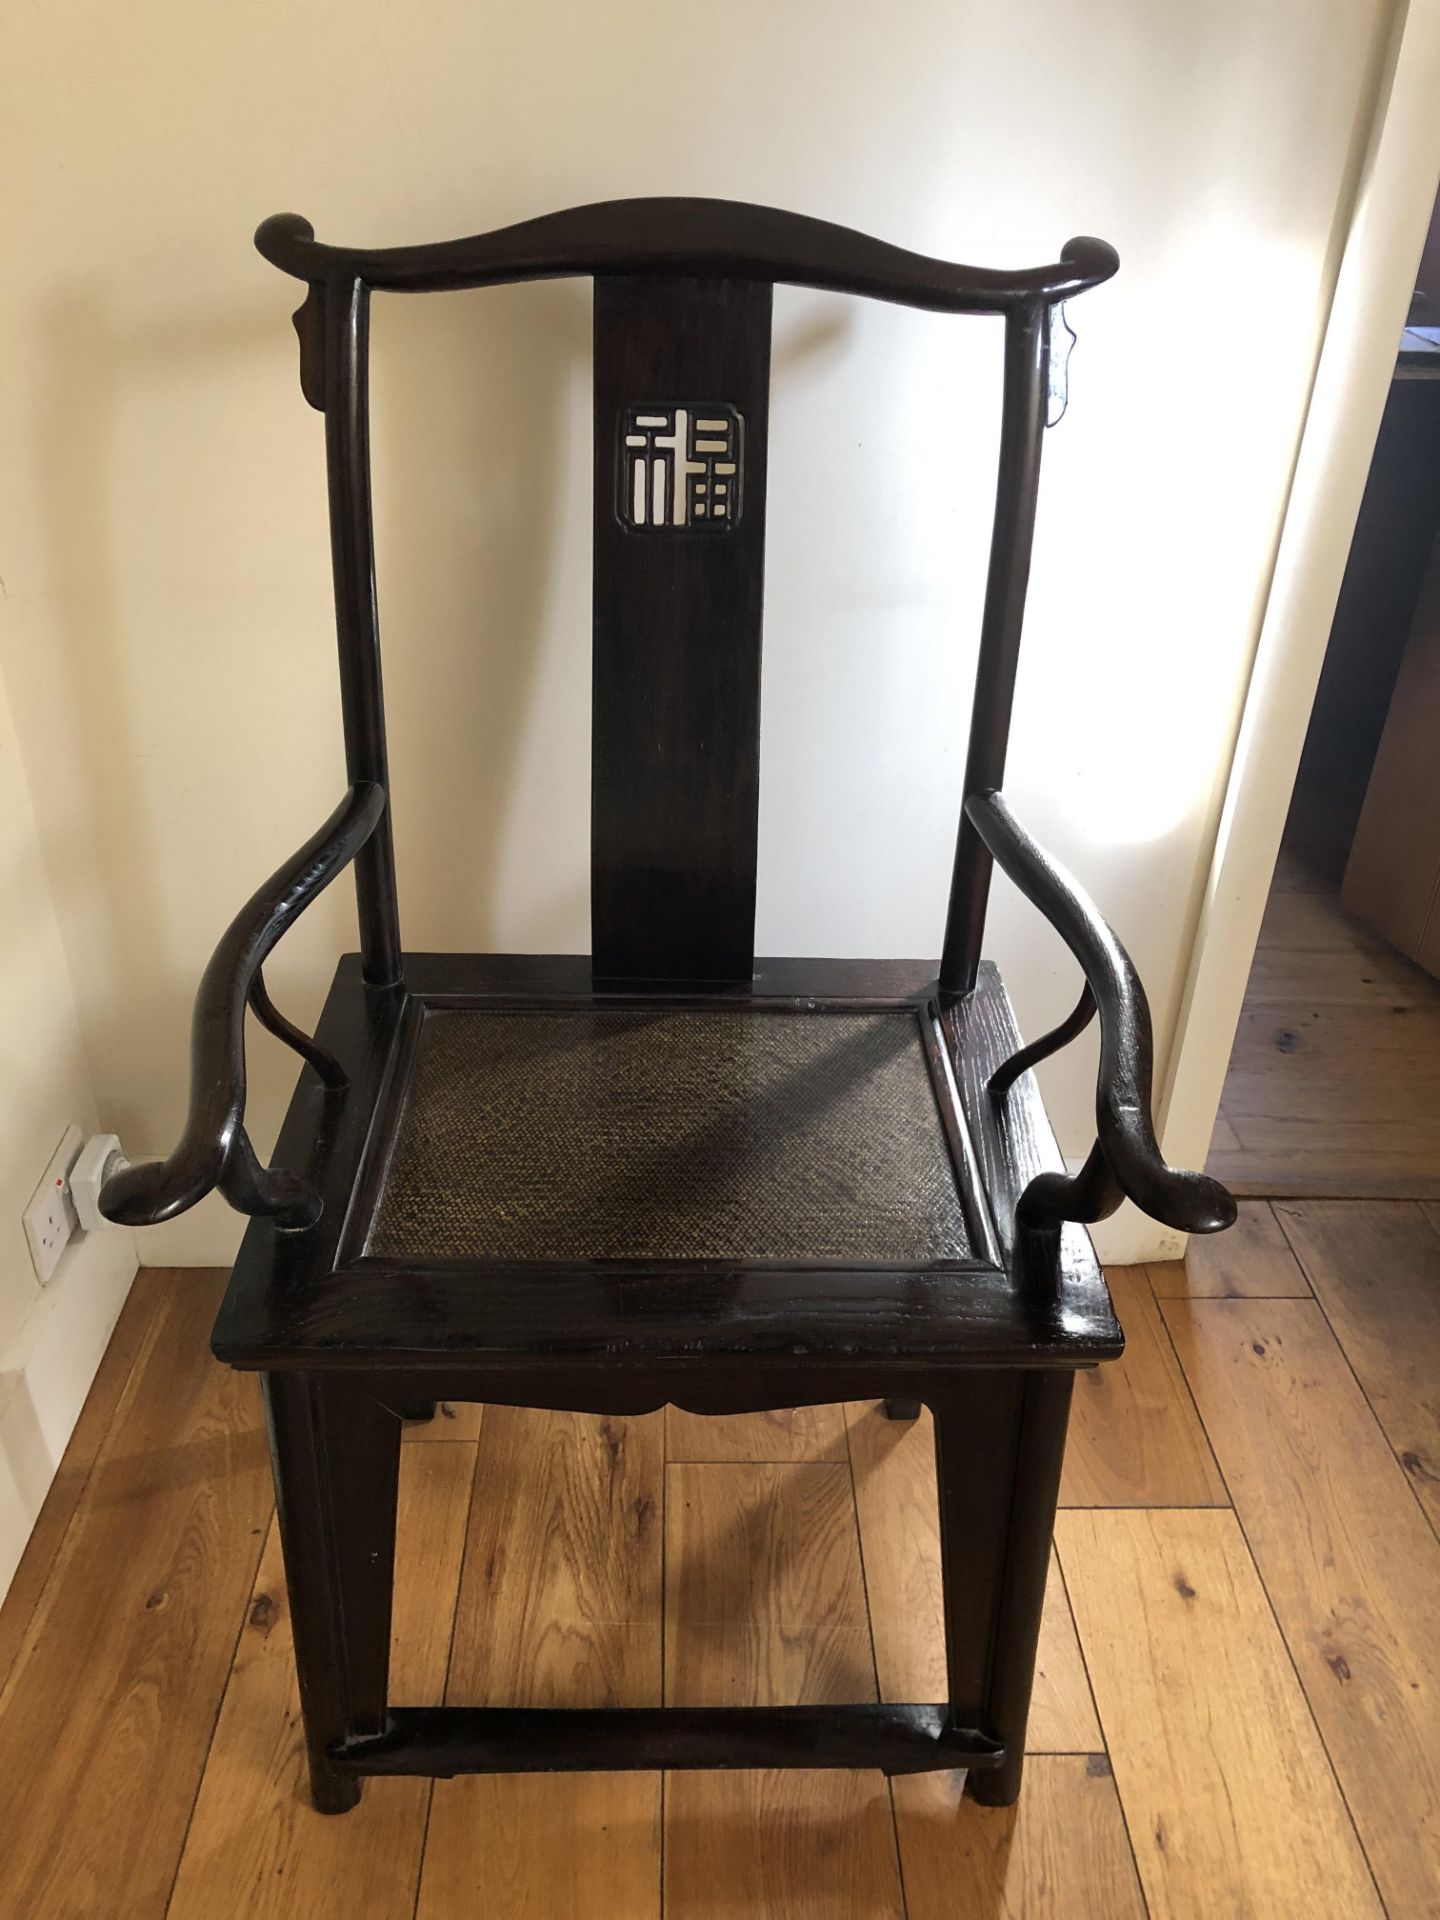 Chinese Wooden Armchair